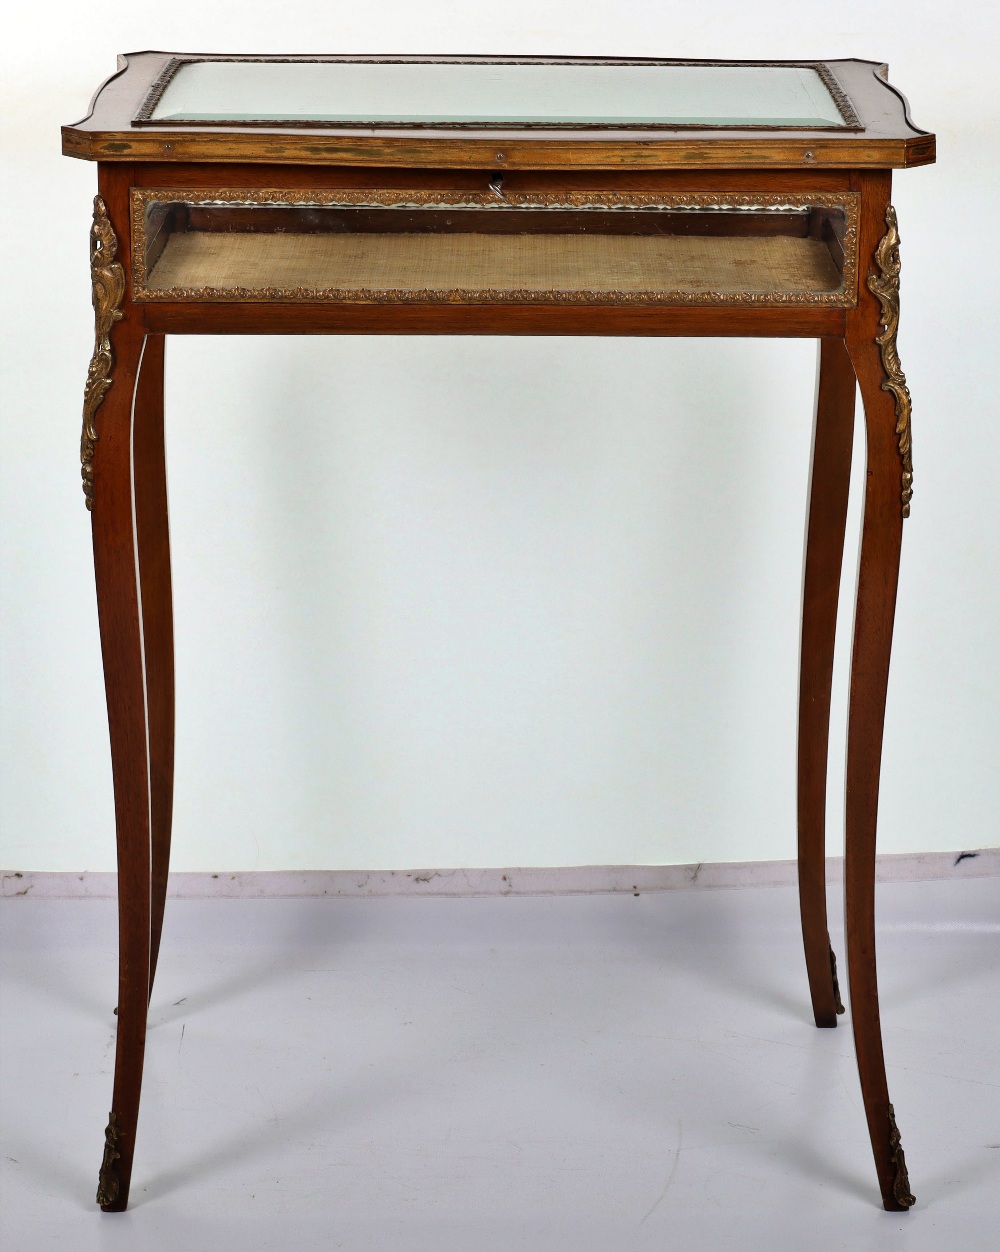 A French mahogany serpentine Bijouterie table in Louis XV style, probably late 19th century